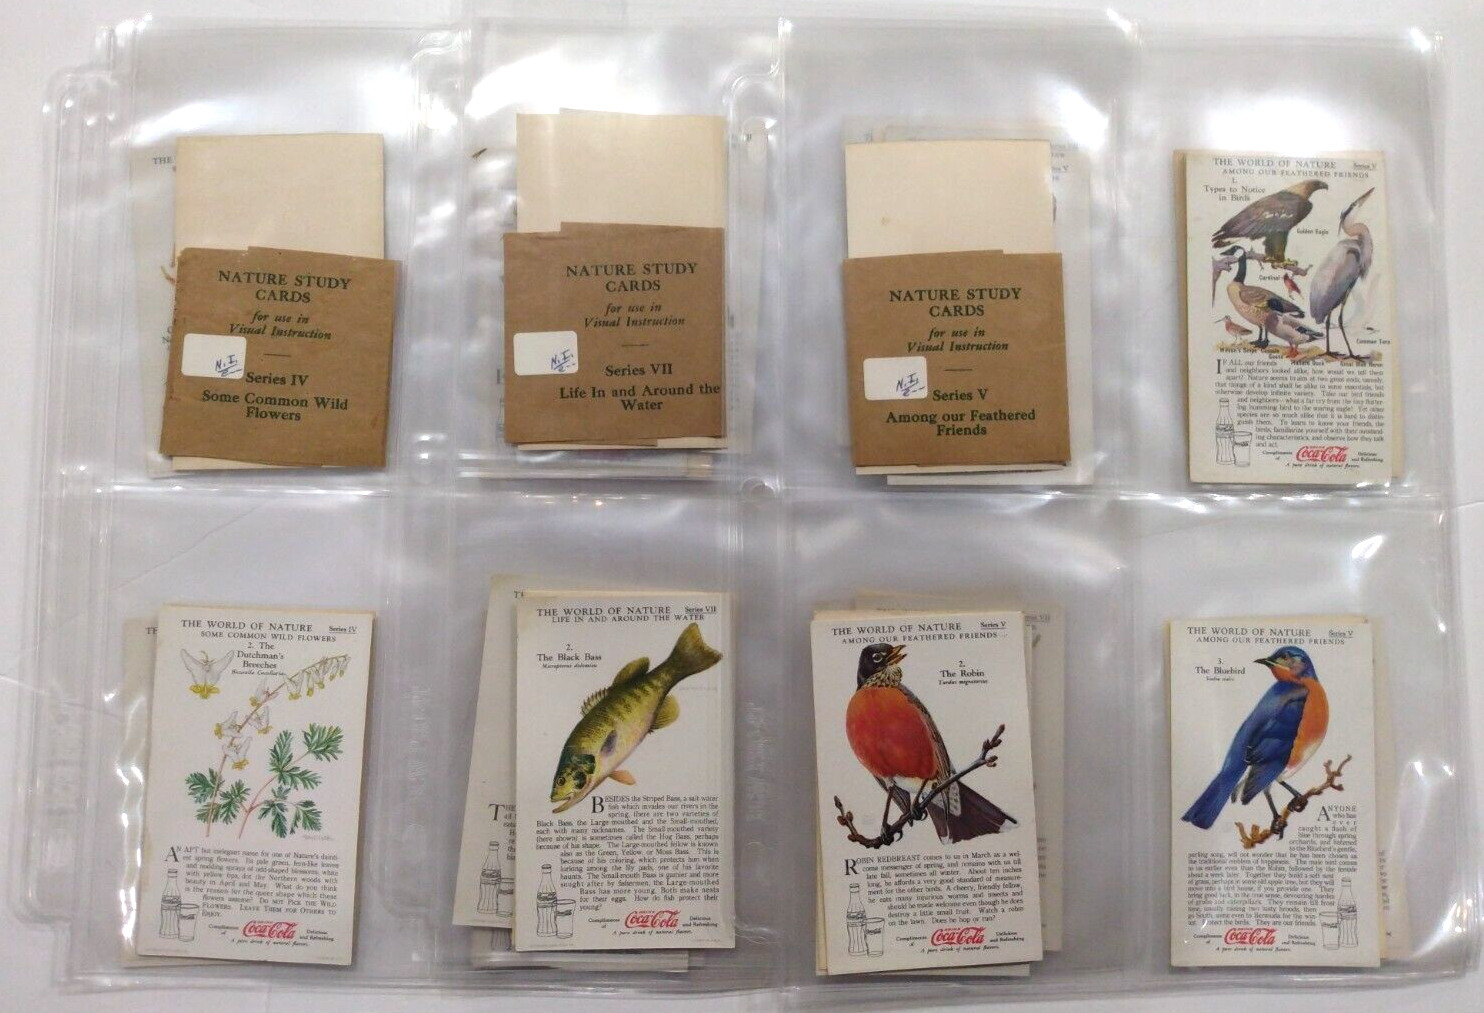 1930's COCA-COLA NATURE STUDY CARDS SERIES IV, VII, and V